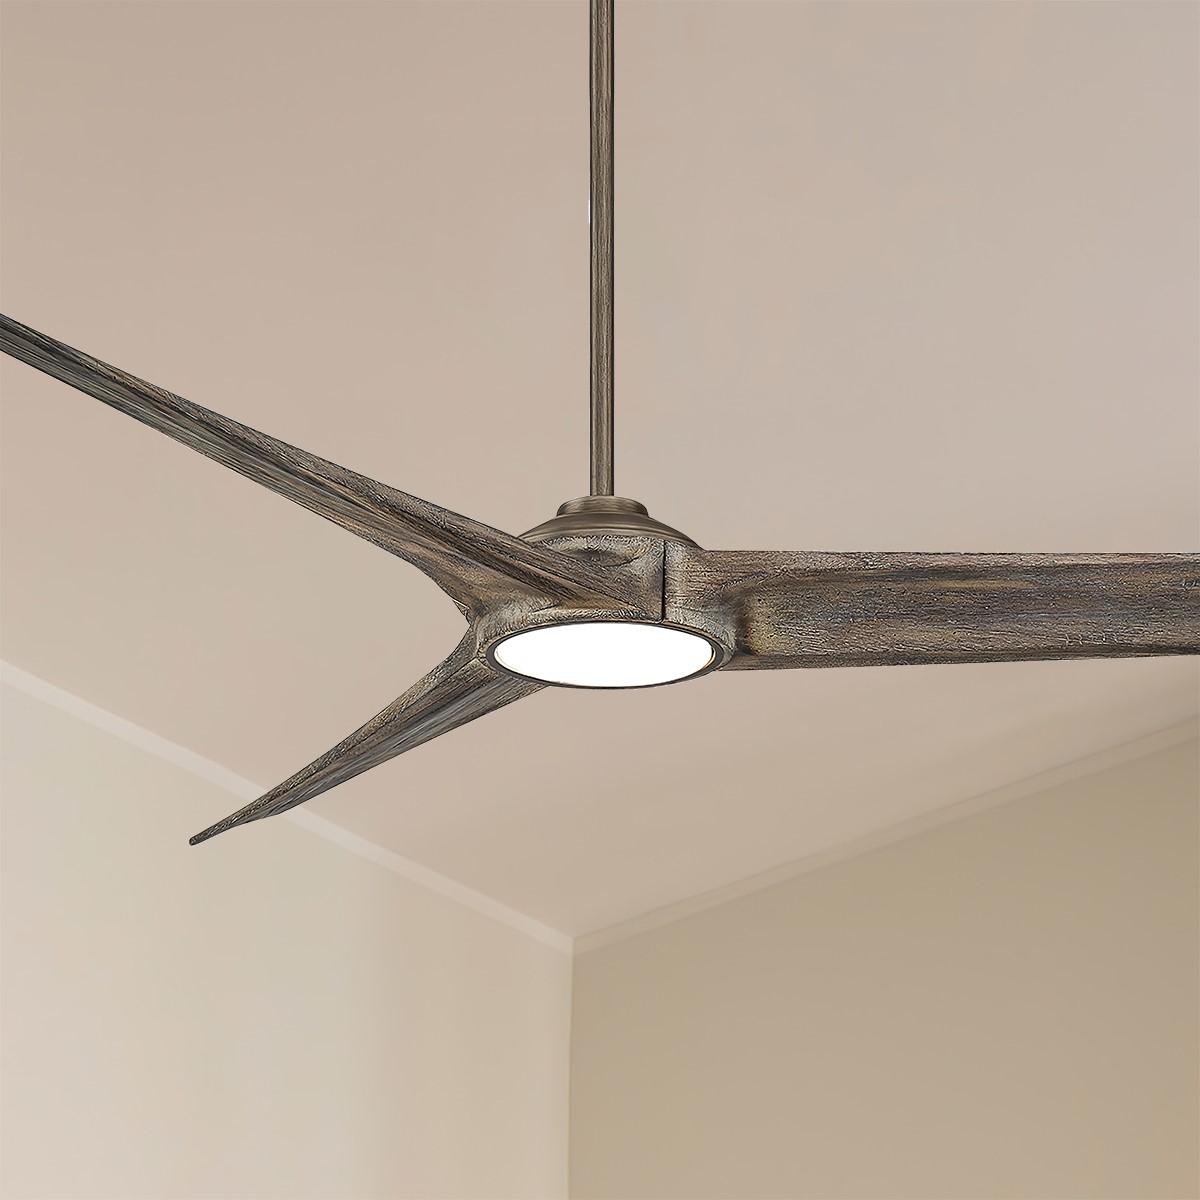 Timber 84 Inch Contemporary Propeller Ceiling Fan With Light And Remote